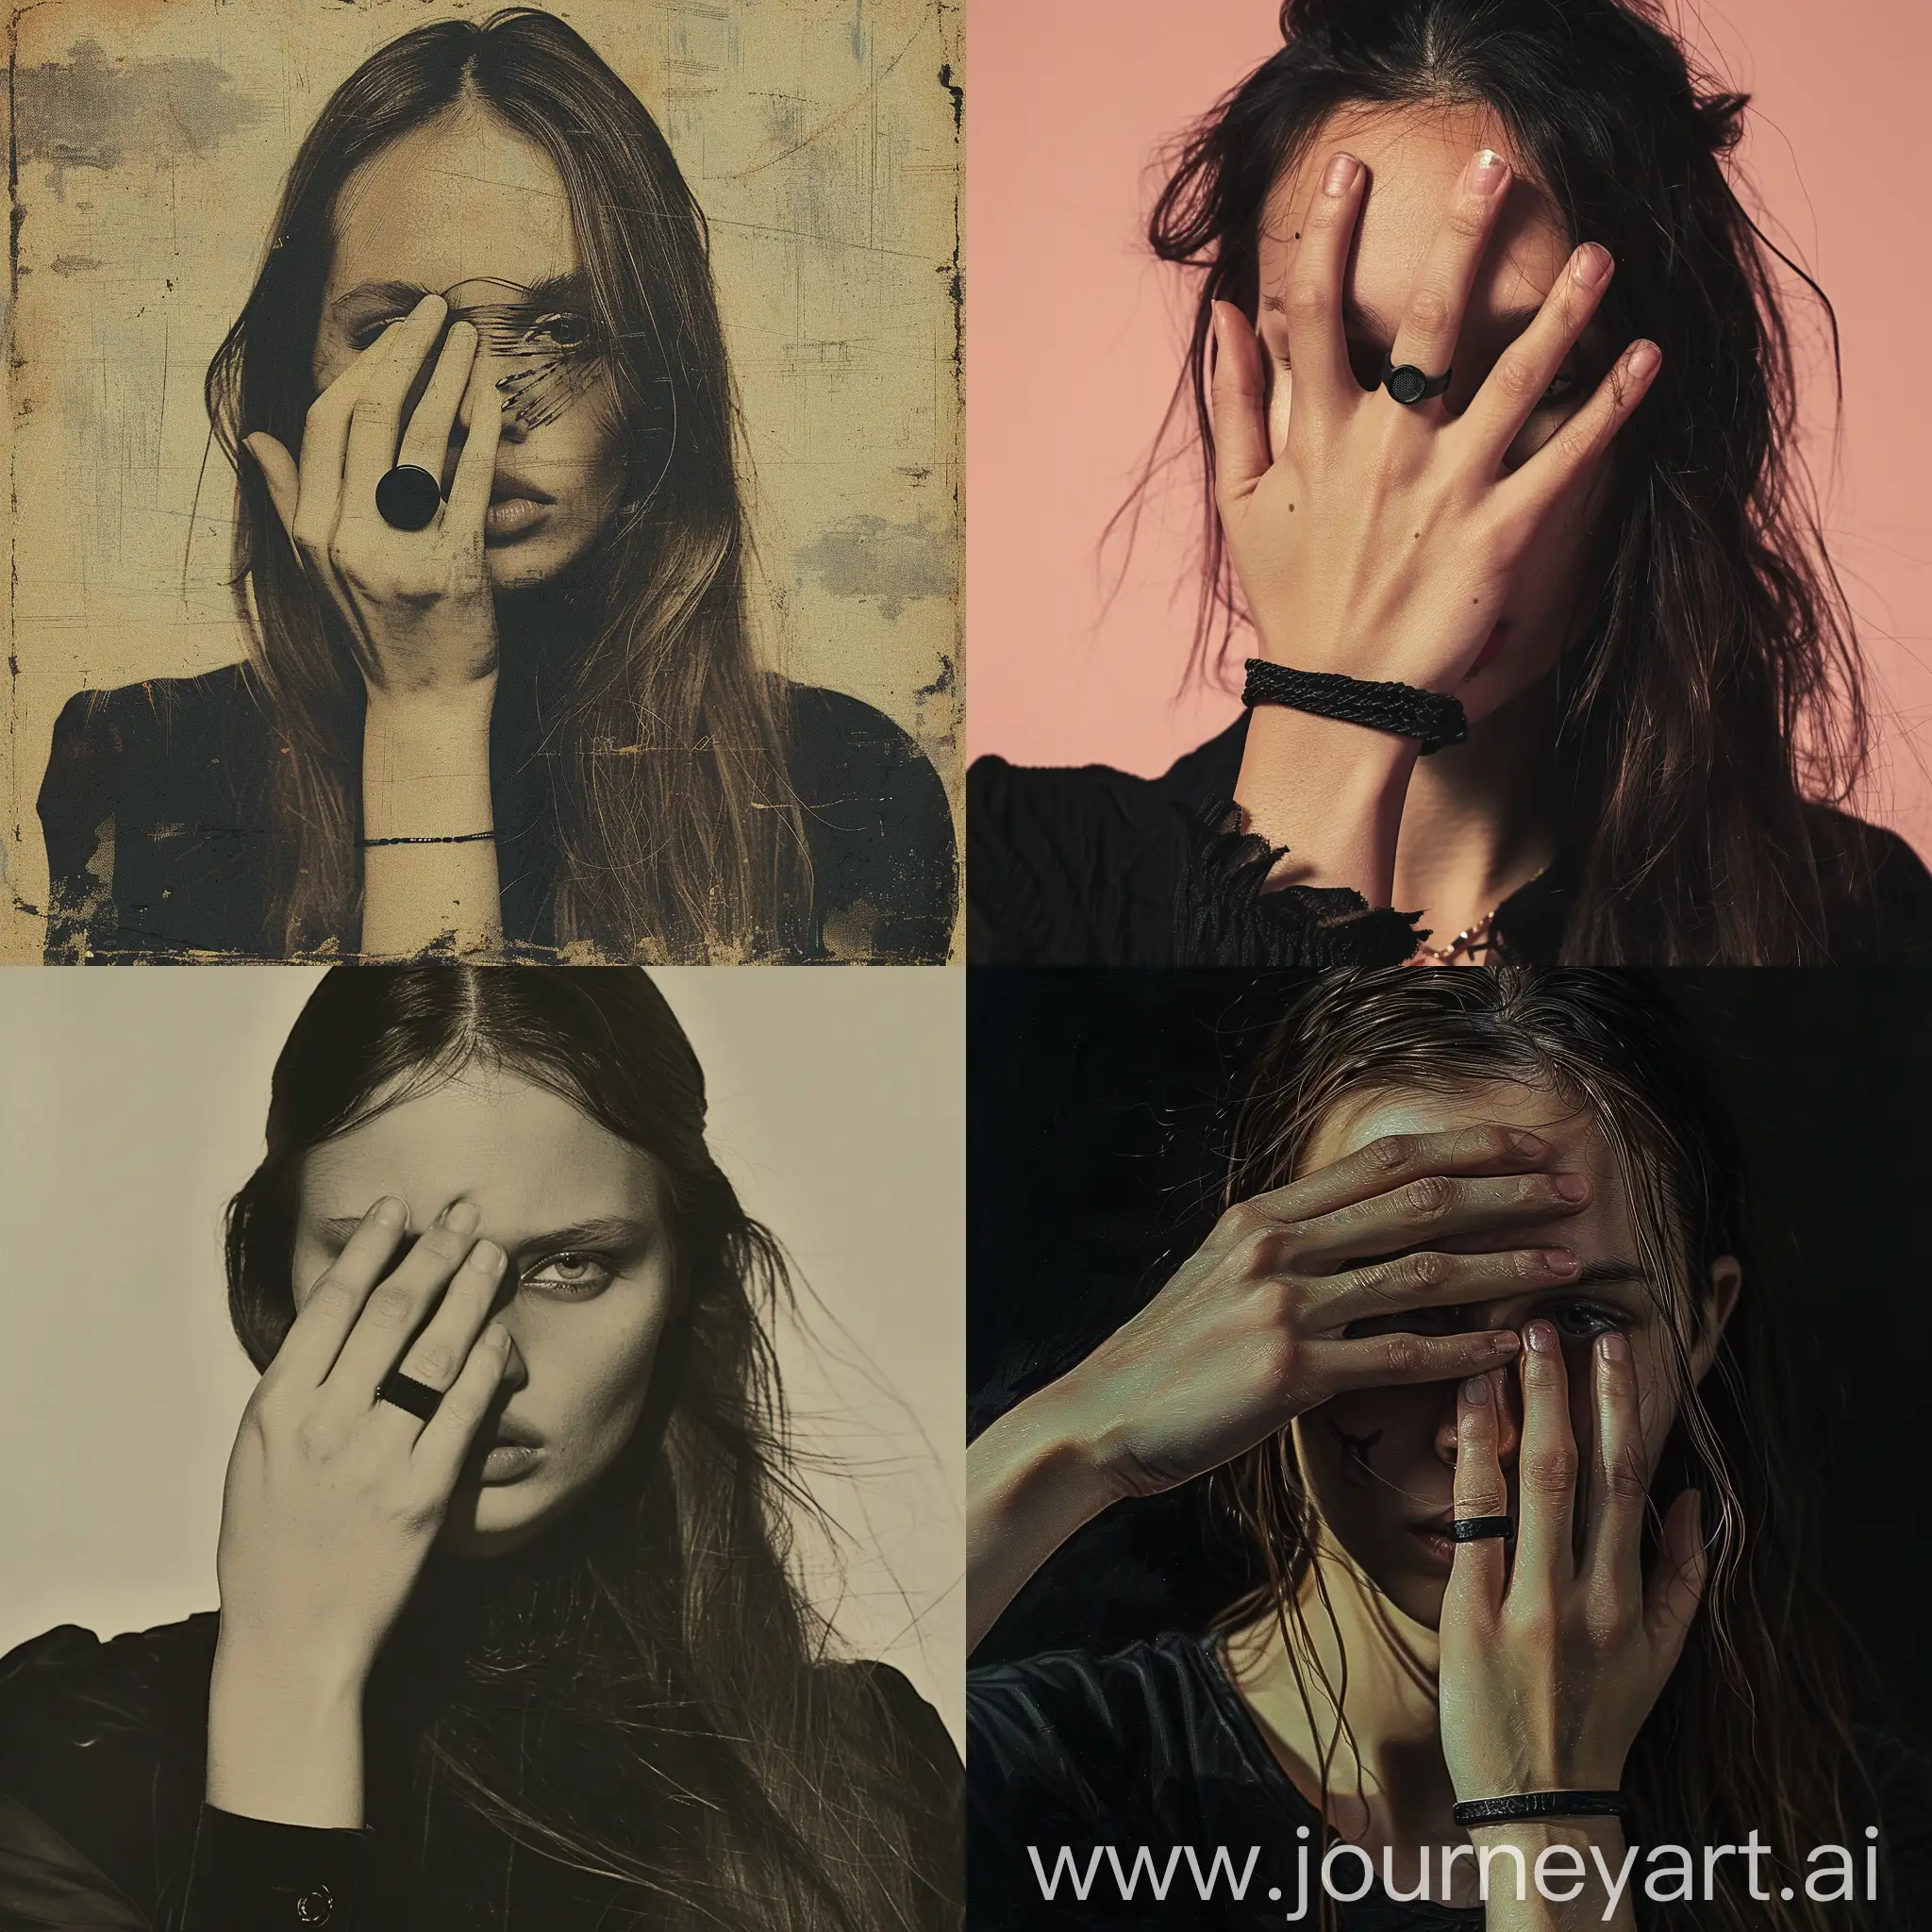 an album art type image of a woman covering her eyes with her hand wearing a black ring and long hair